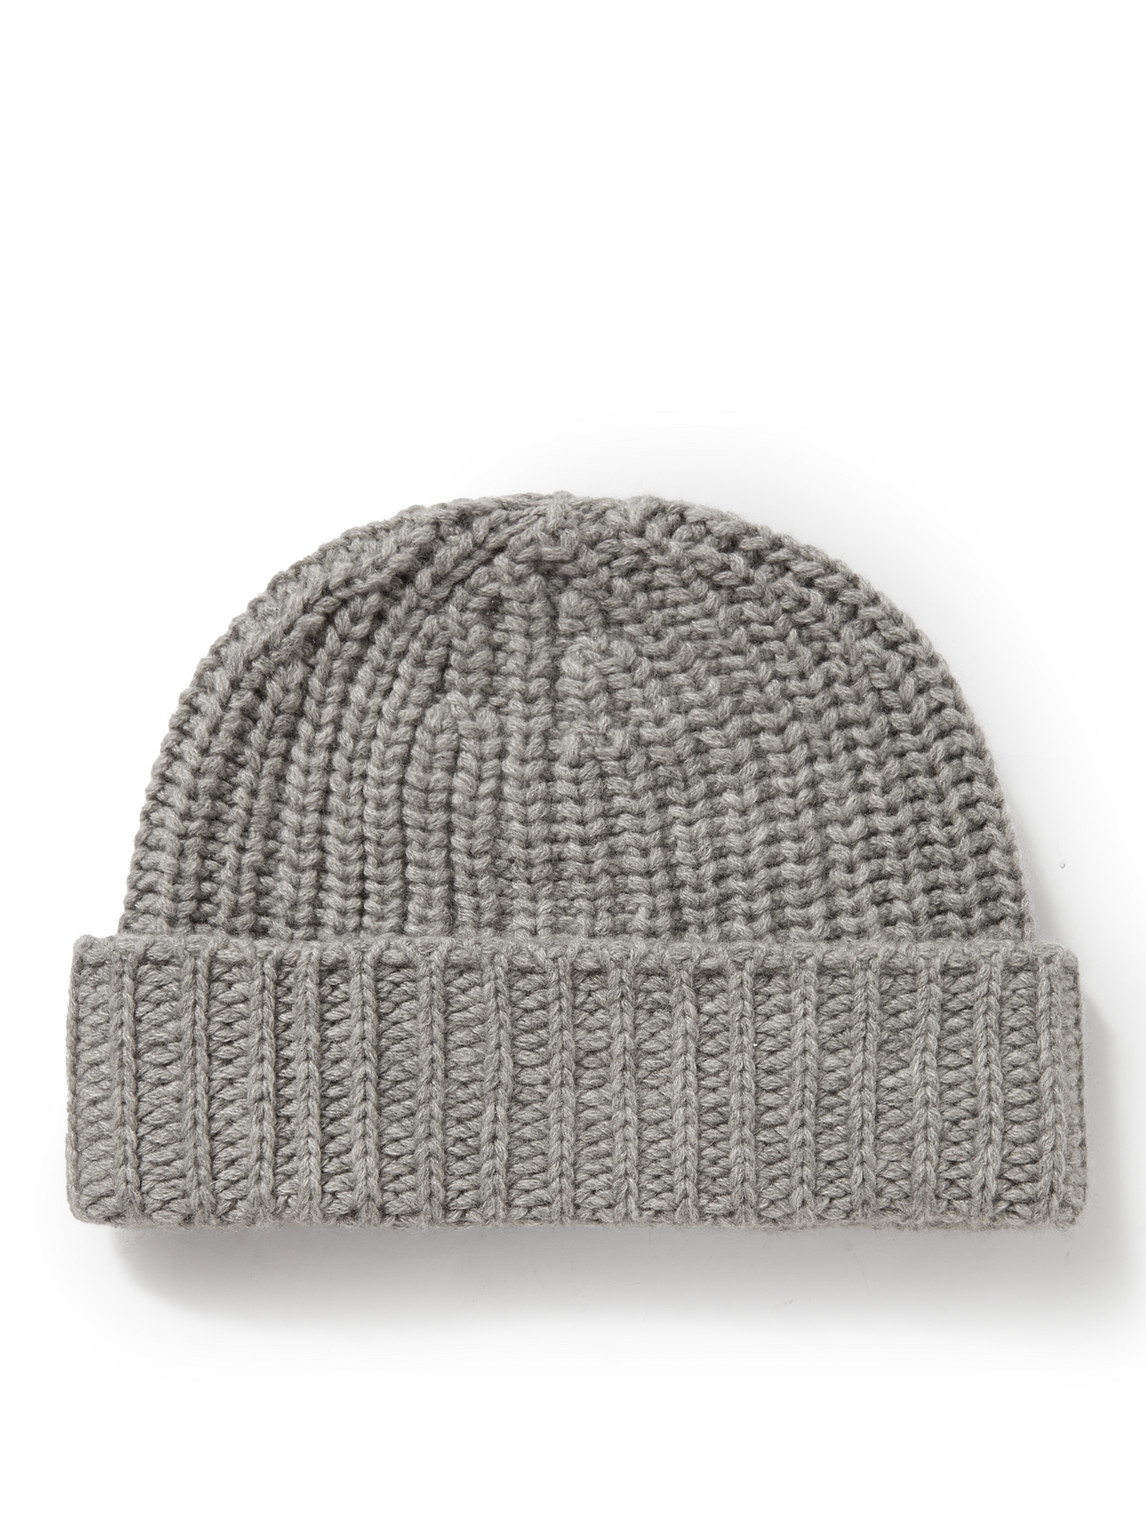 JOHNSTONS OF ELGIN RIBBED CASHMERE BEANIE